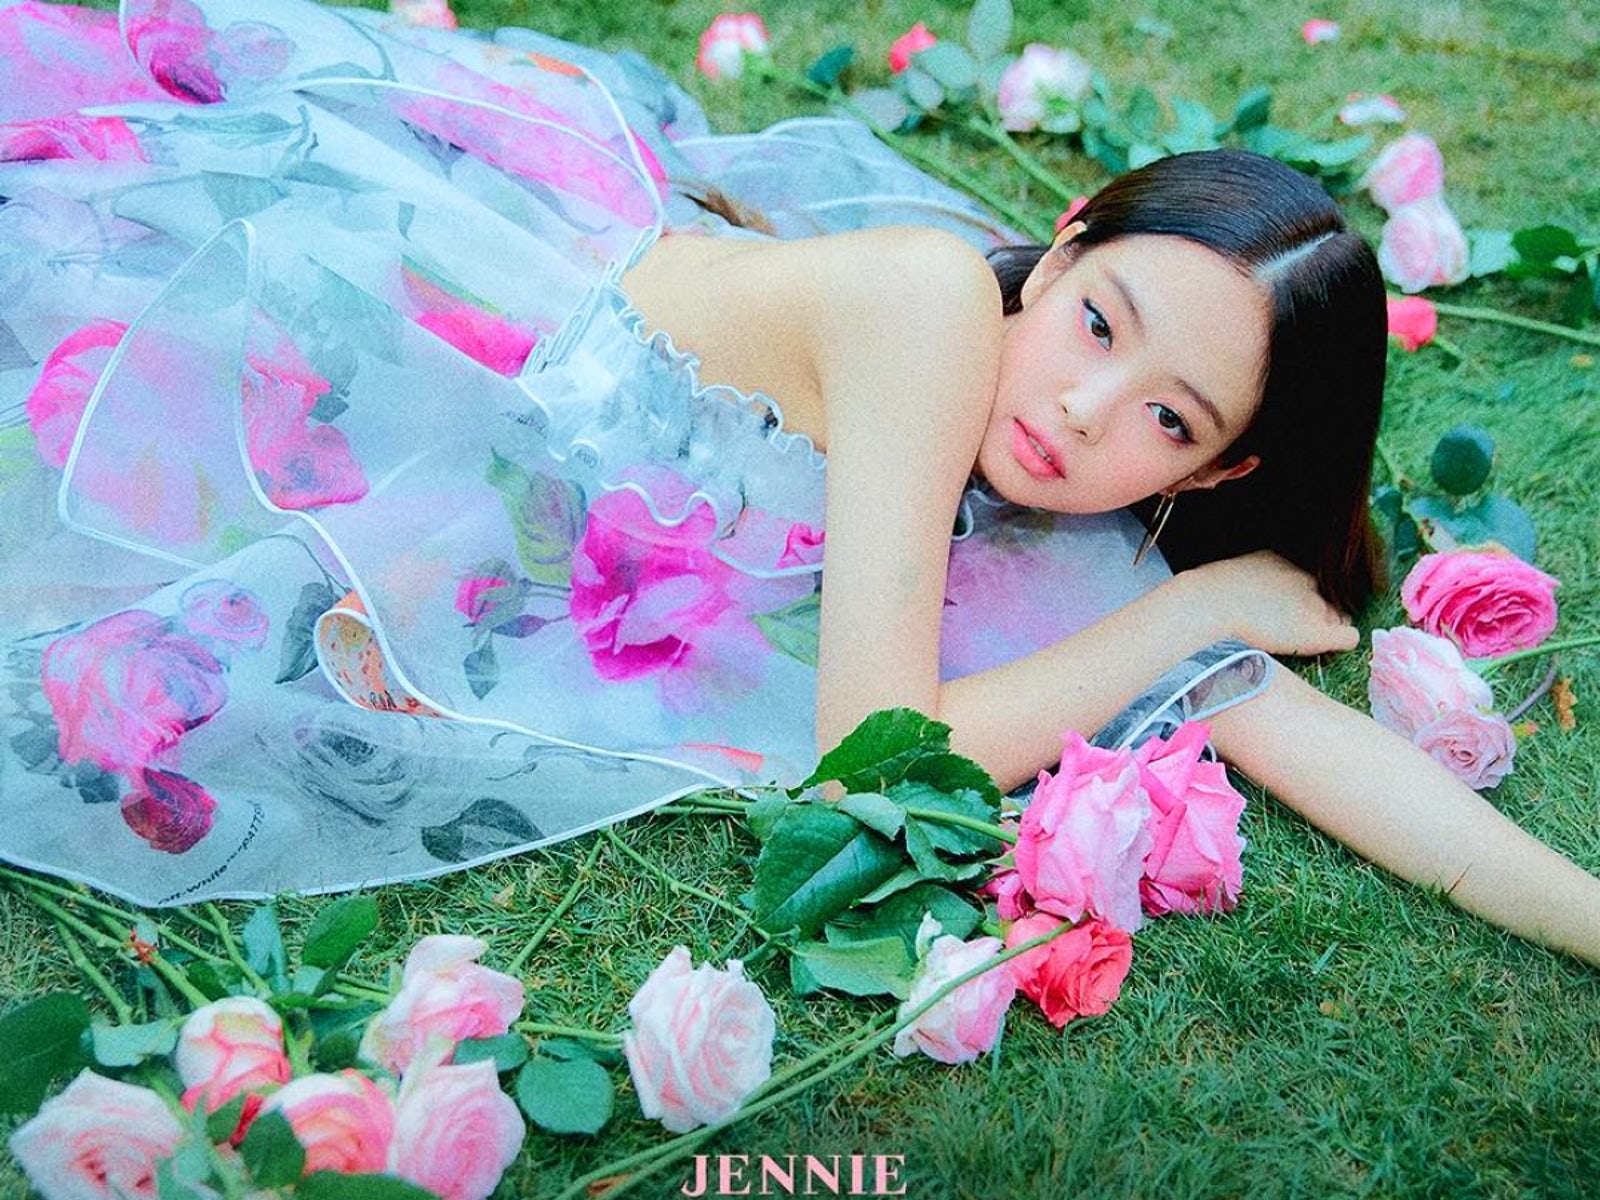 Black Pink singer Jennie shares new solo posters - Reality TV World